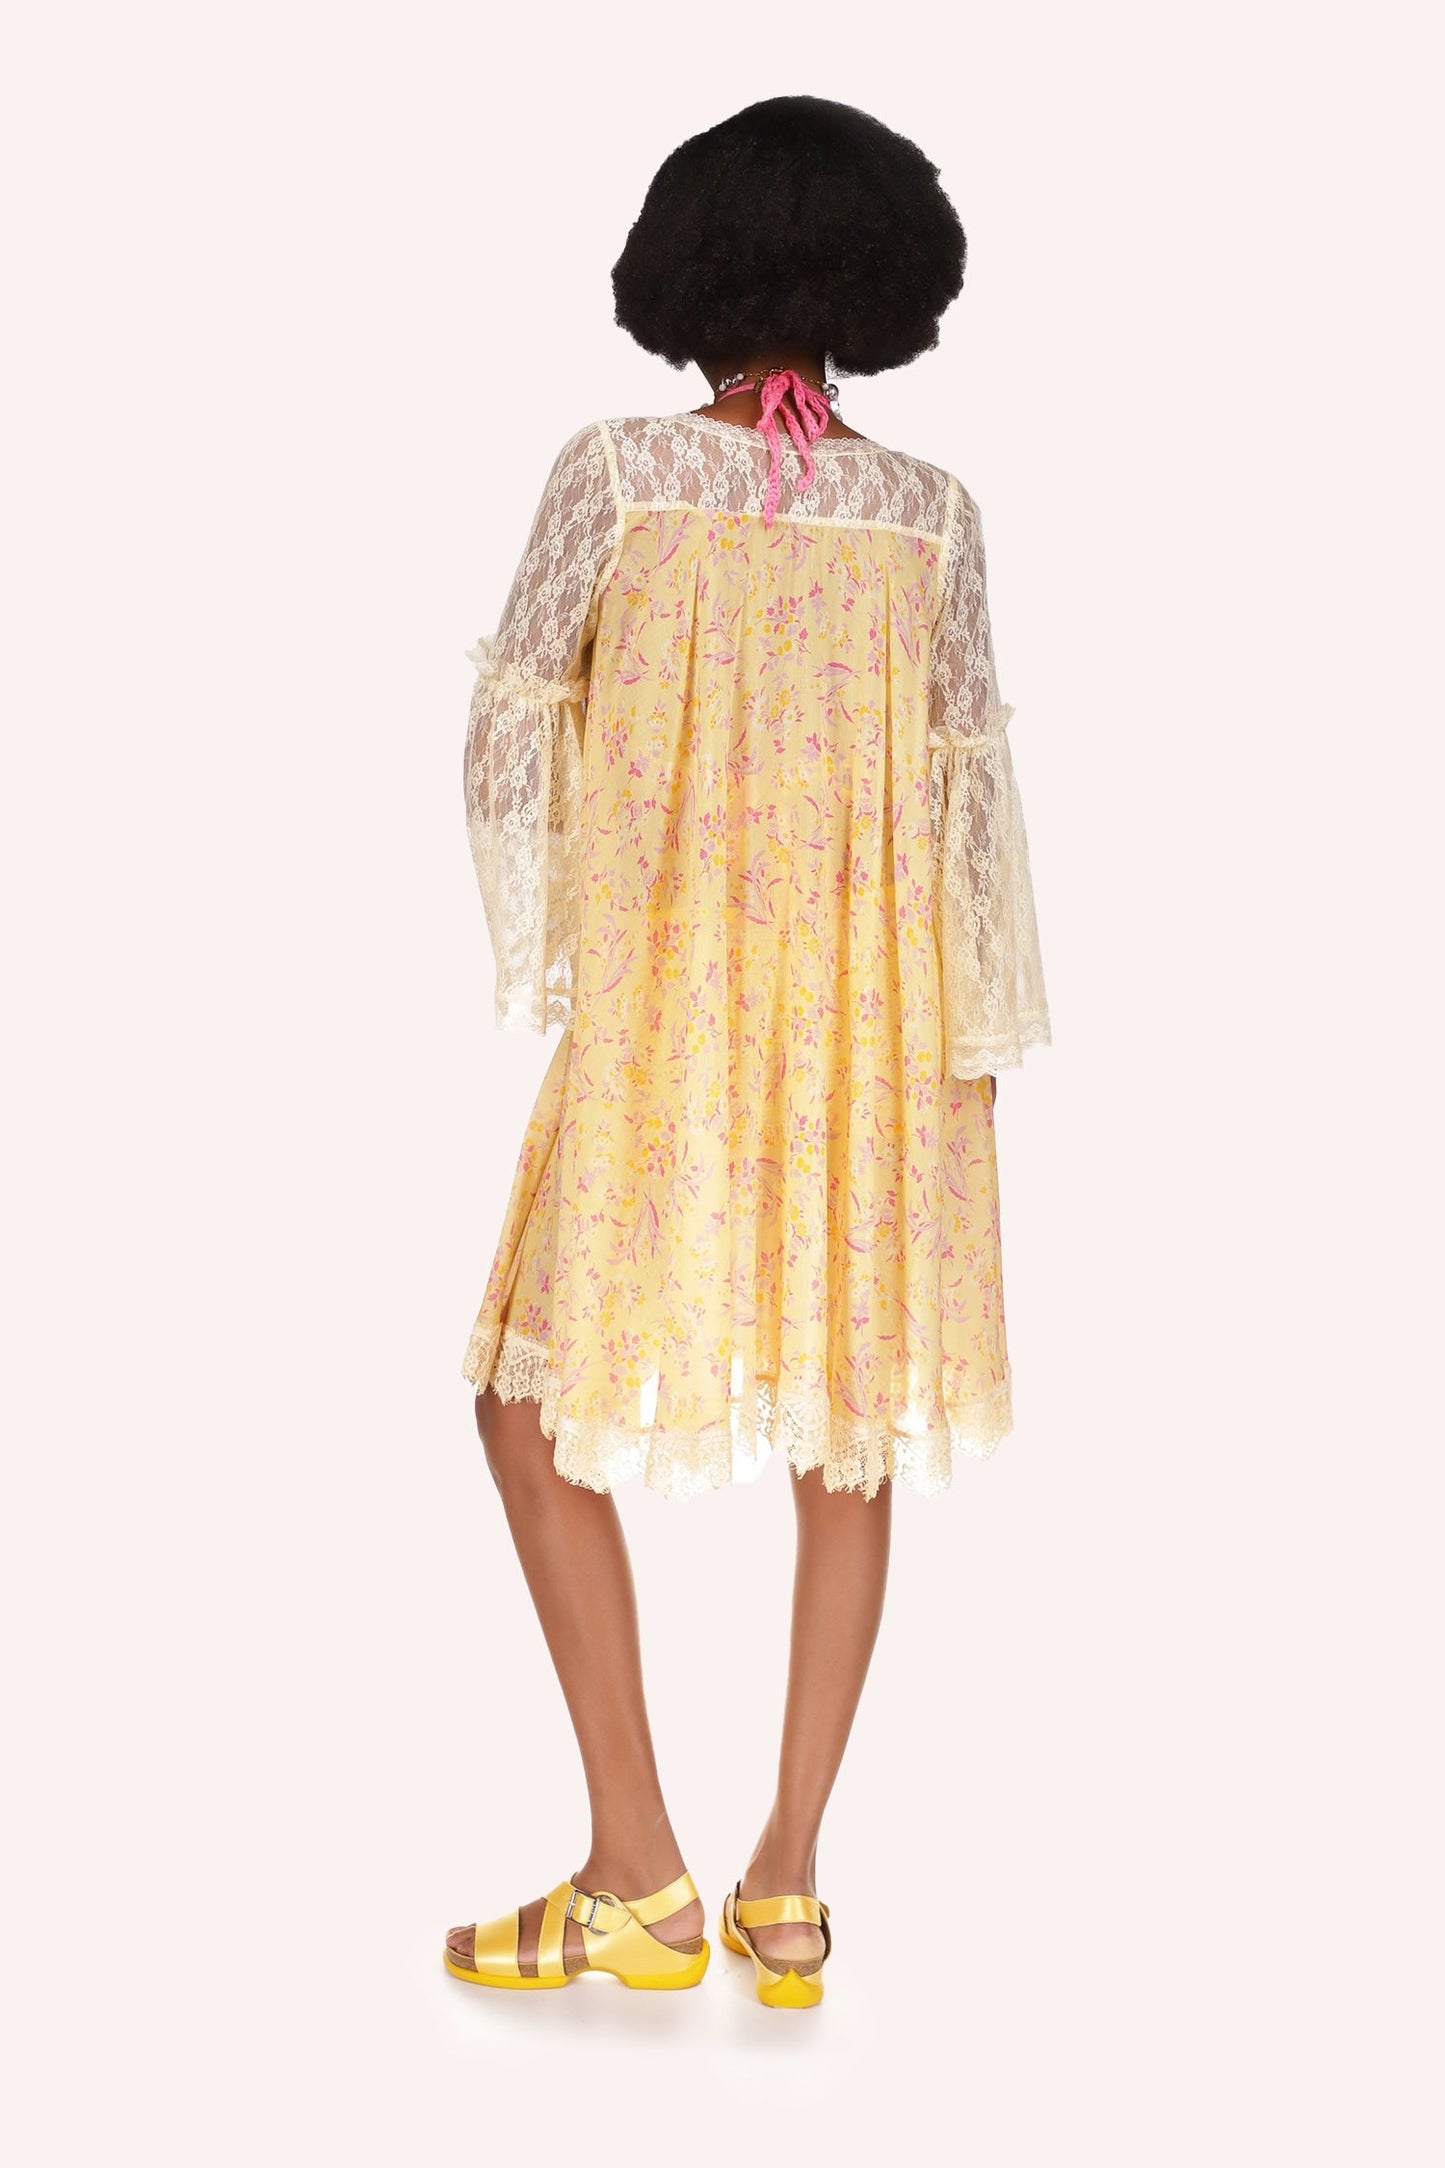 Arcadia Blossom Cover Up is in yellow color at center, arms are laced see-thru, with red print